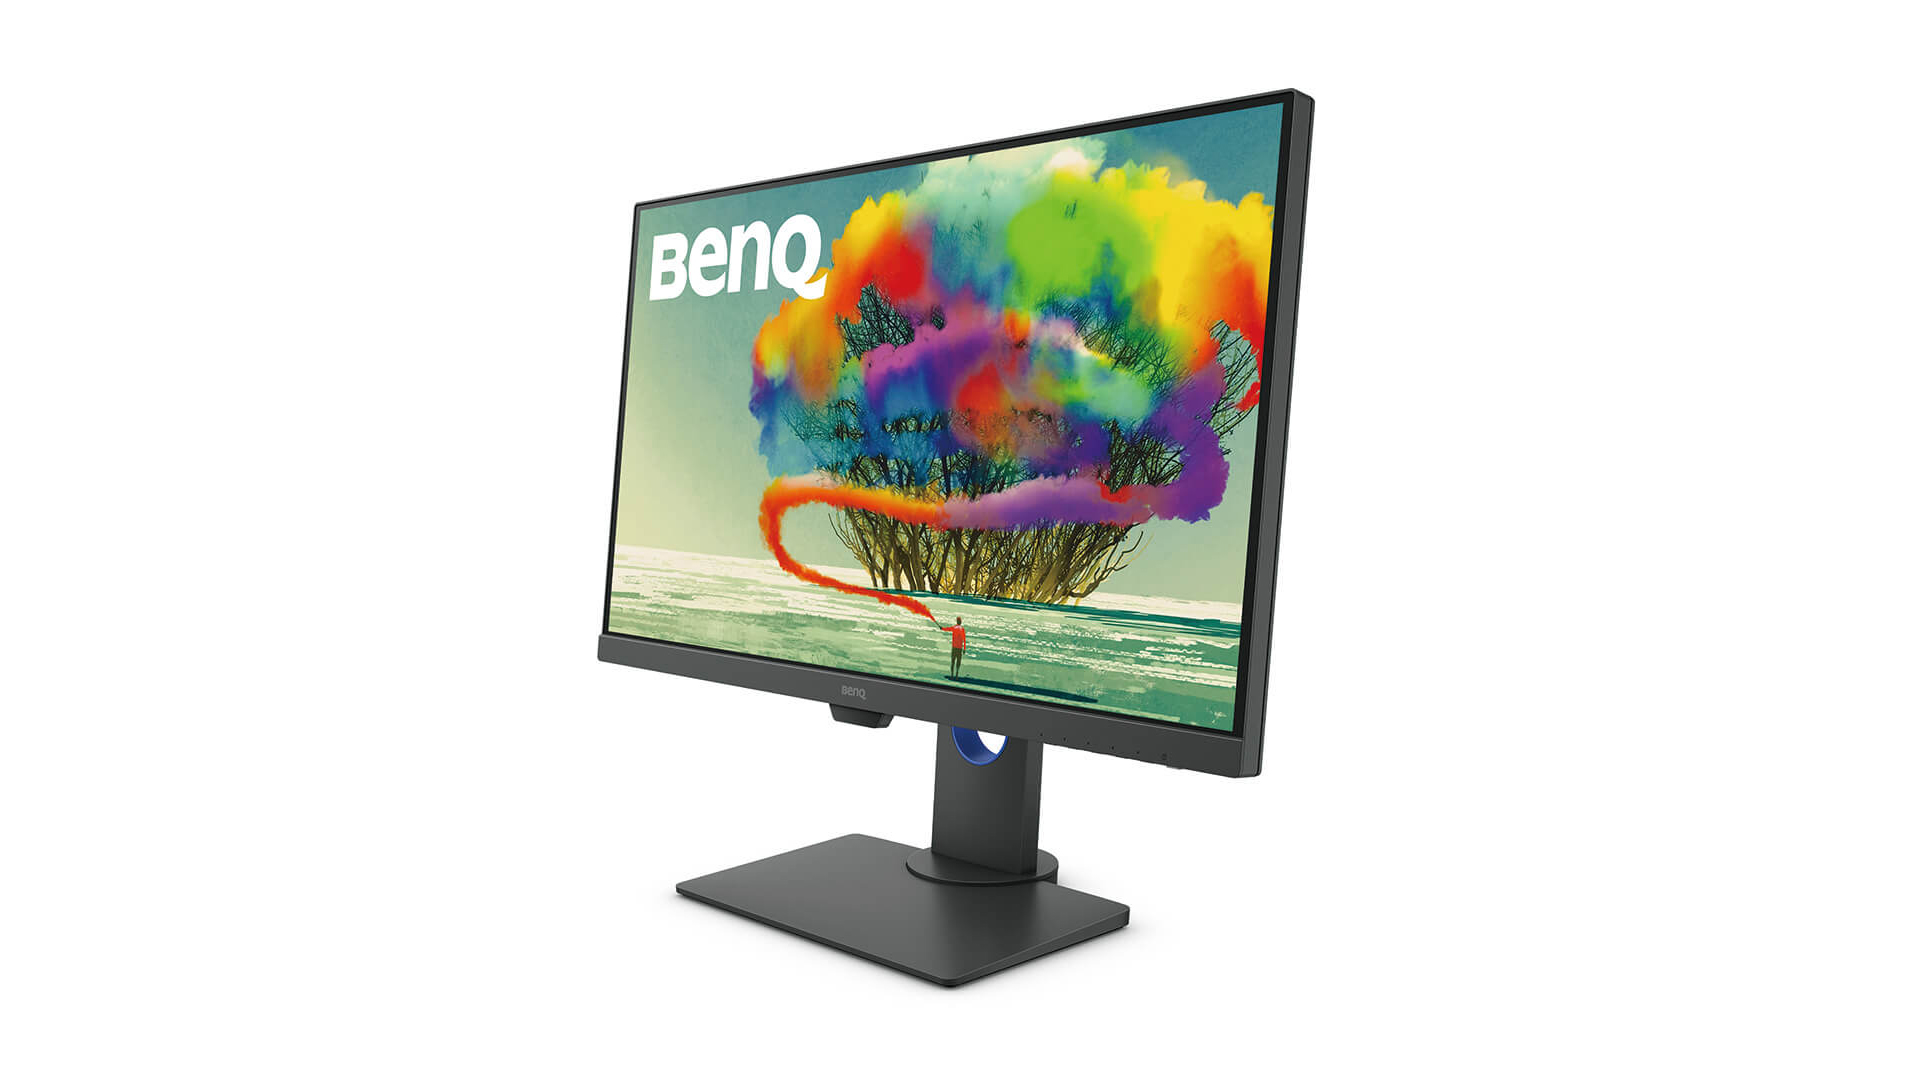 BenQ PD2700U at an angle on a white background